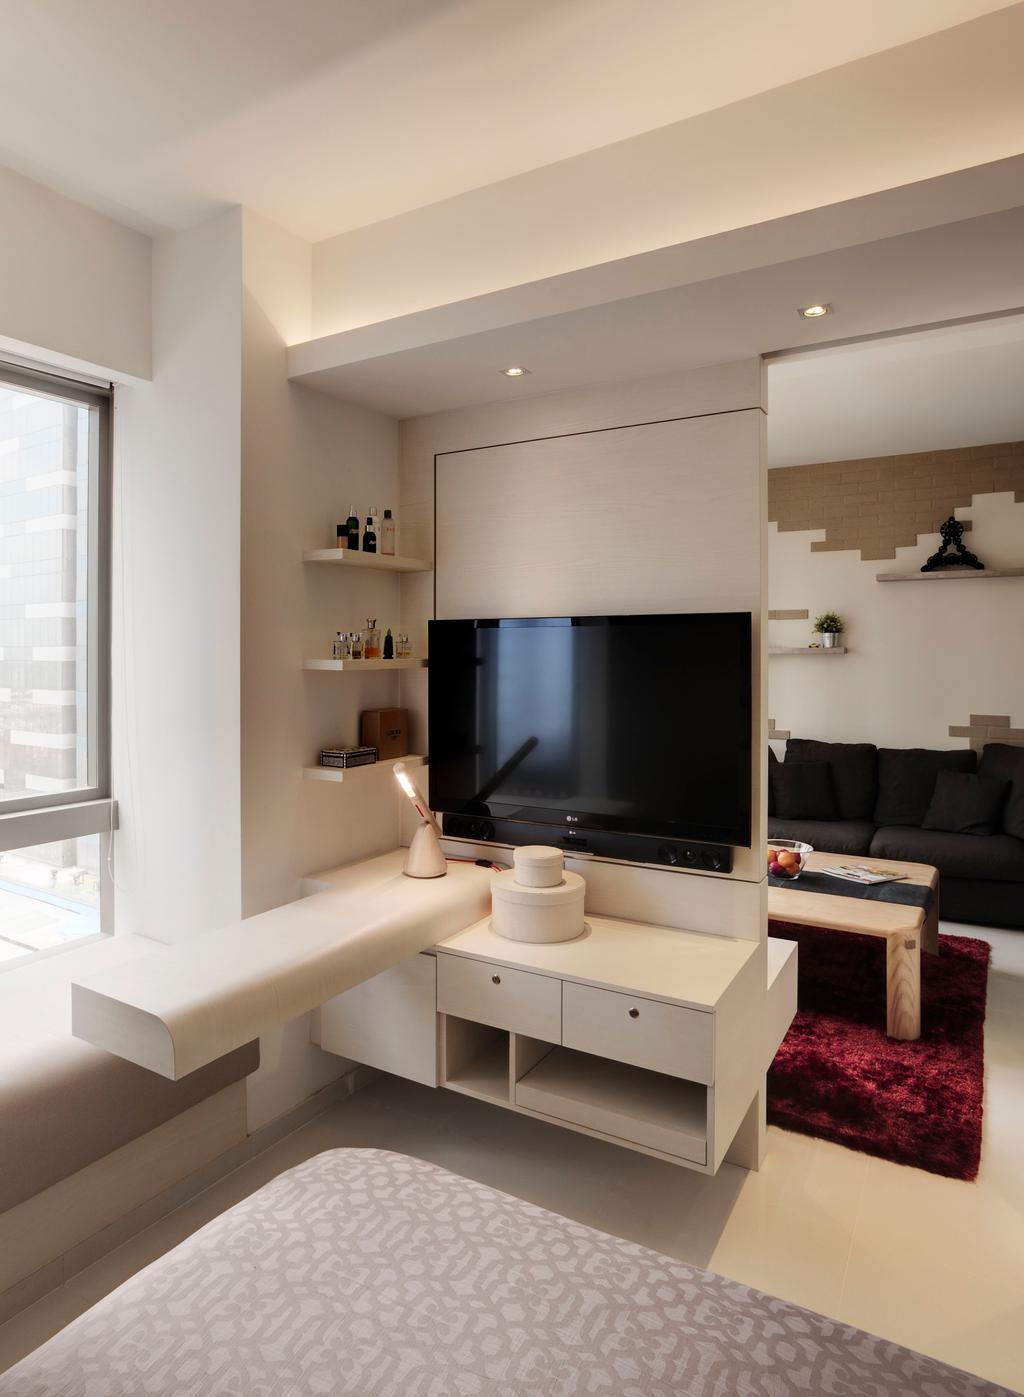 Modern, Condo, Bedroom, One Shenton, Interior Designer, Liid Studio, Swivel Wall, Swivel, Window Seat, Shelf, Shelves, Concealed Lighting, False Ceiling, Tv Console, White, Red Brick Wall, Sofa, Rug, Chair, Bay Window, Couch, Furniture, Indoors, Interior Design